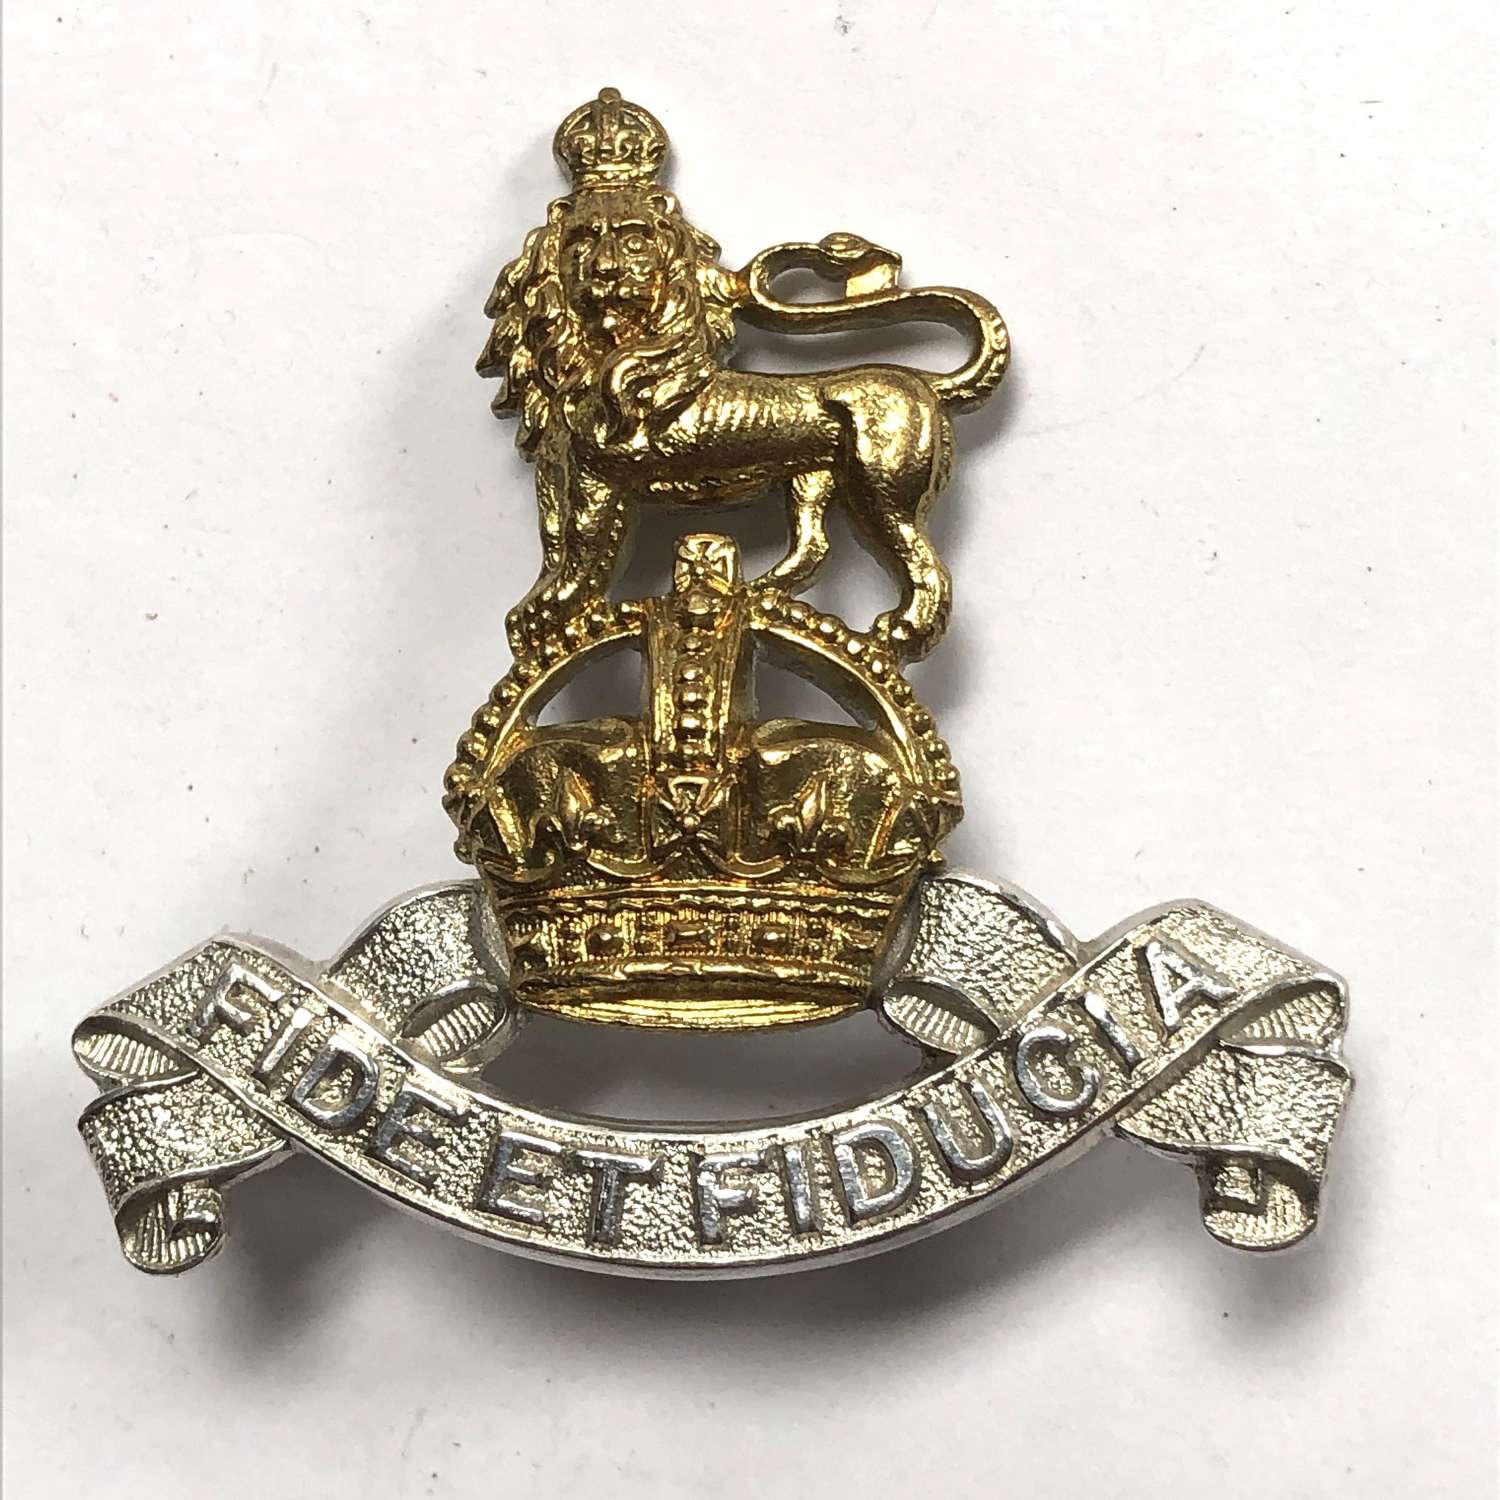 Royal Army Pay Corps Officer's cap badge circa 1929-52 by Firmin